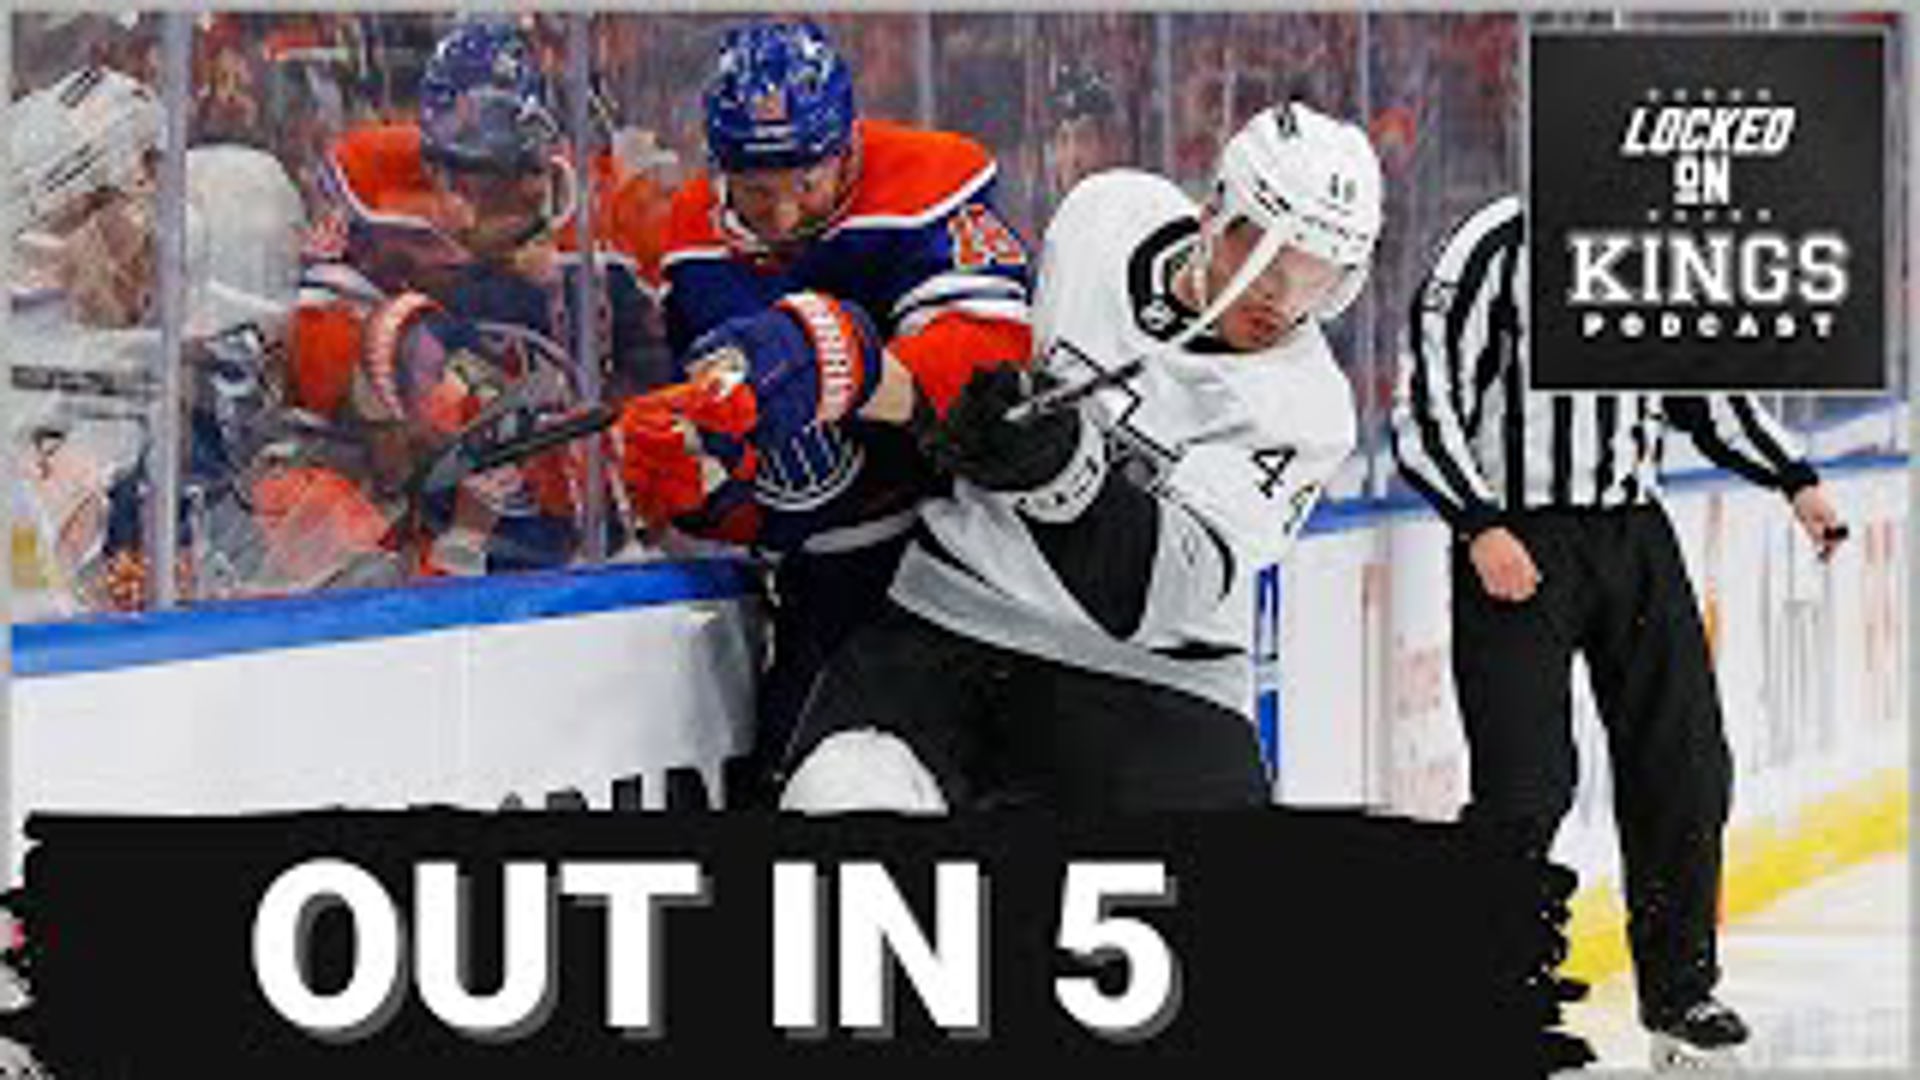 The Kings season comes to an end with a tough loss 4-3 loss in Edmonton we’ll break it down (including some controversial calls), recap the series and what it means!